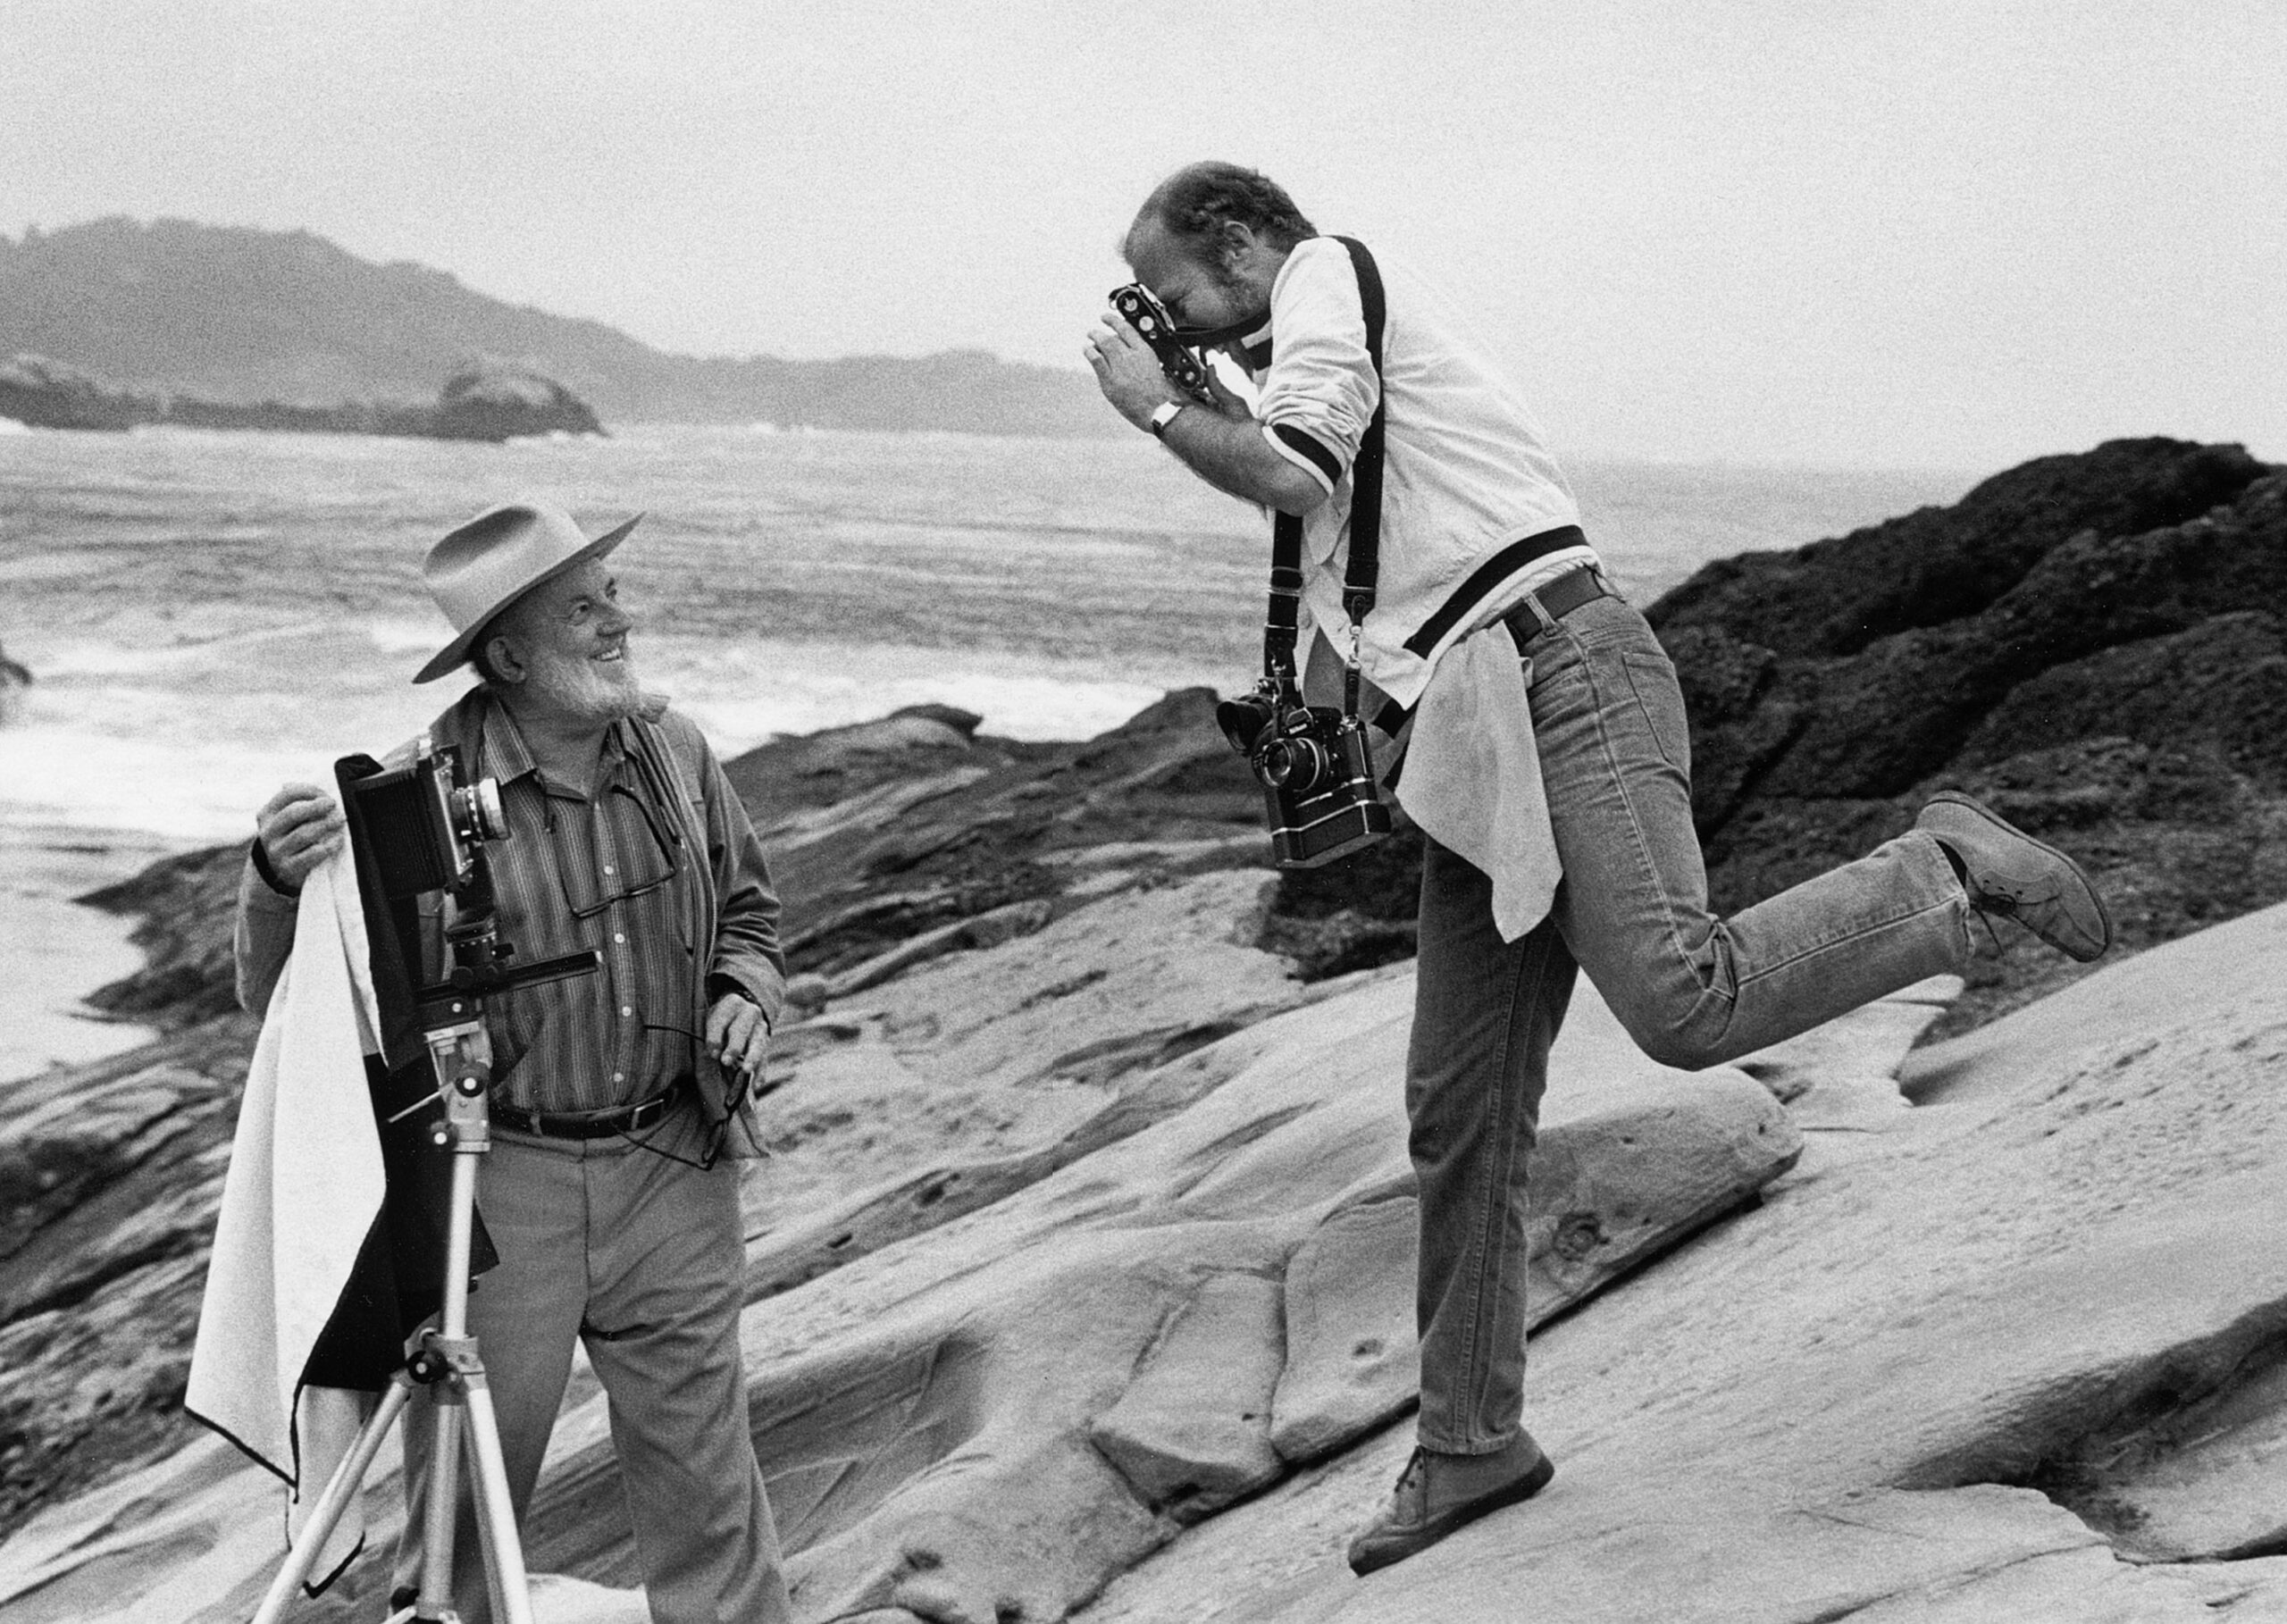 Kennerly photographs Ansel at Point Lobos for TIME Magazine. Photo by Alan Ross